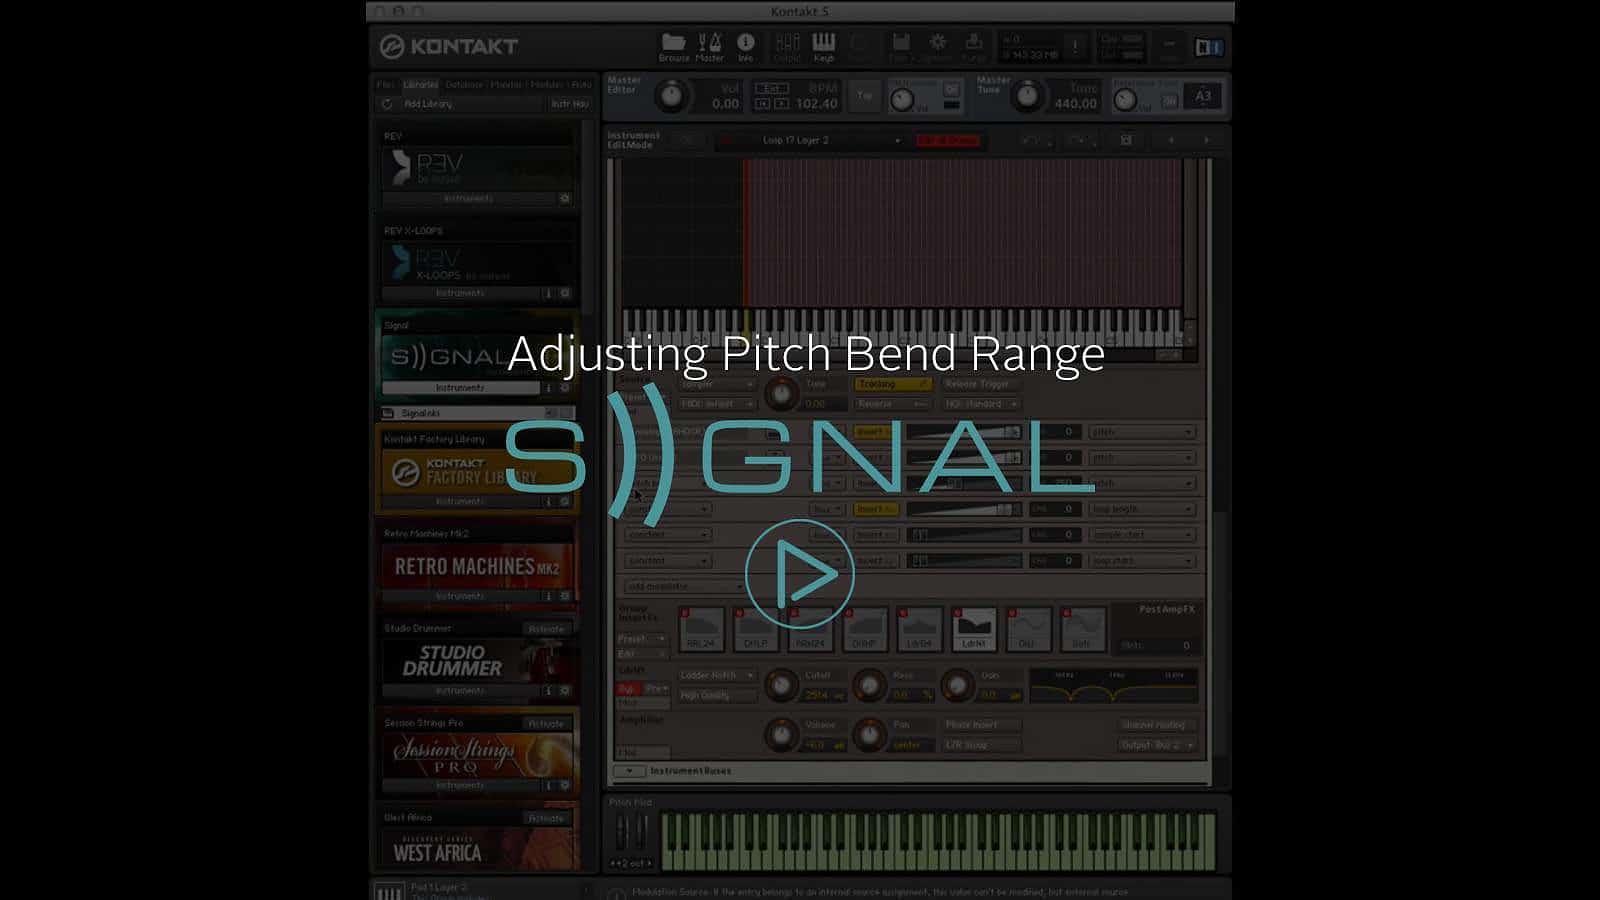 Adjusting Pitch Bend Range In SIGNAL by Output